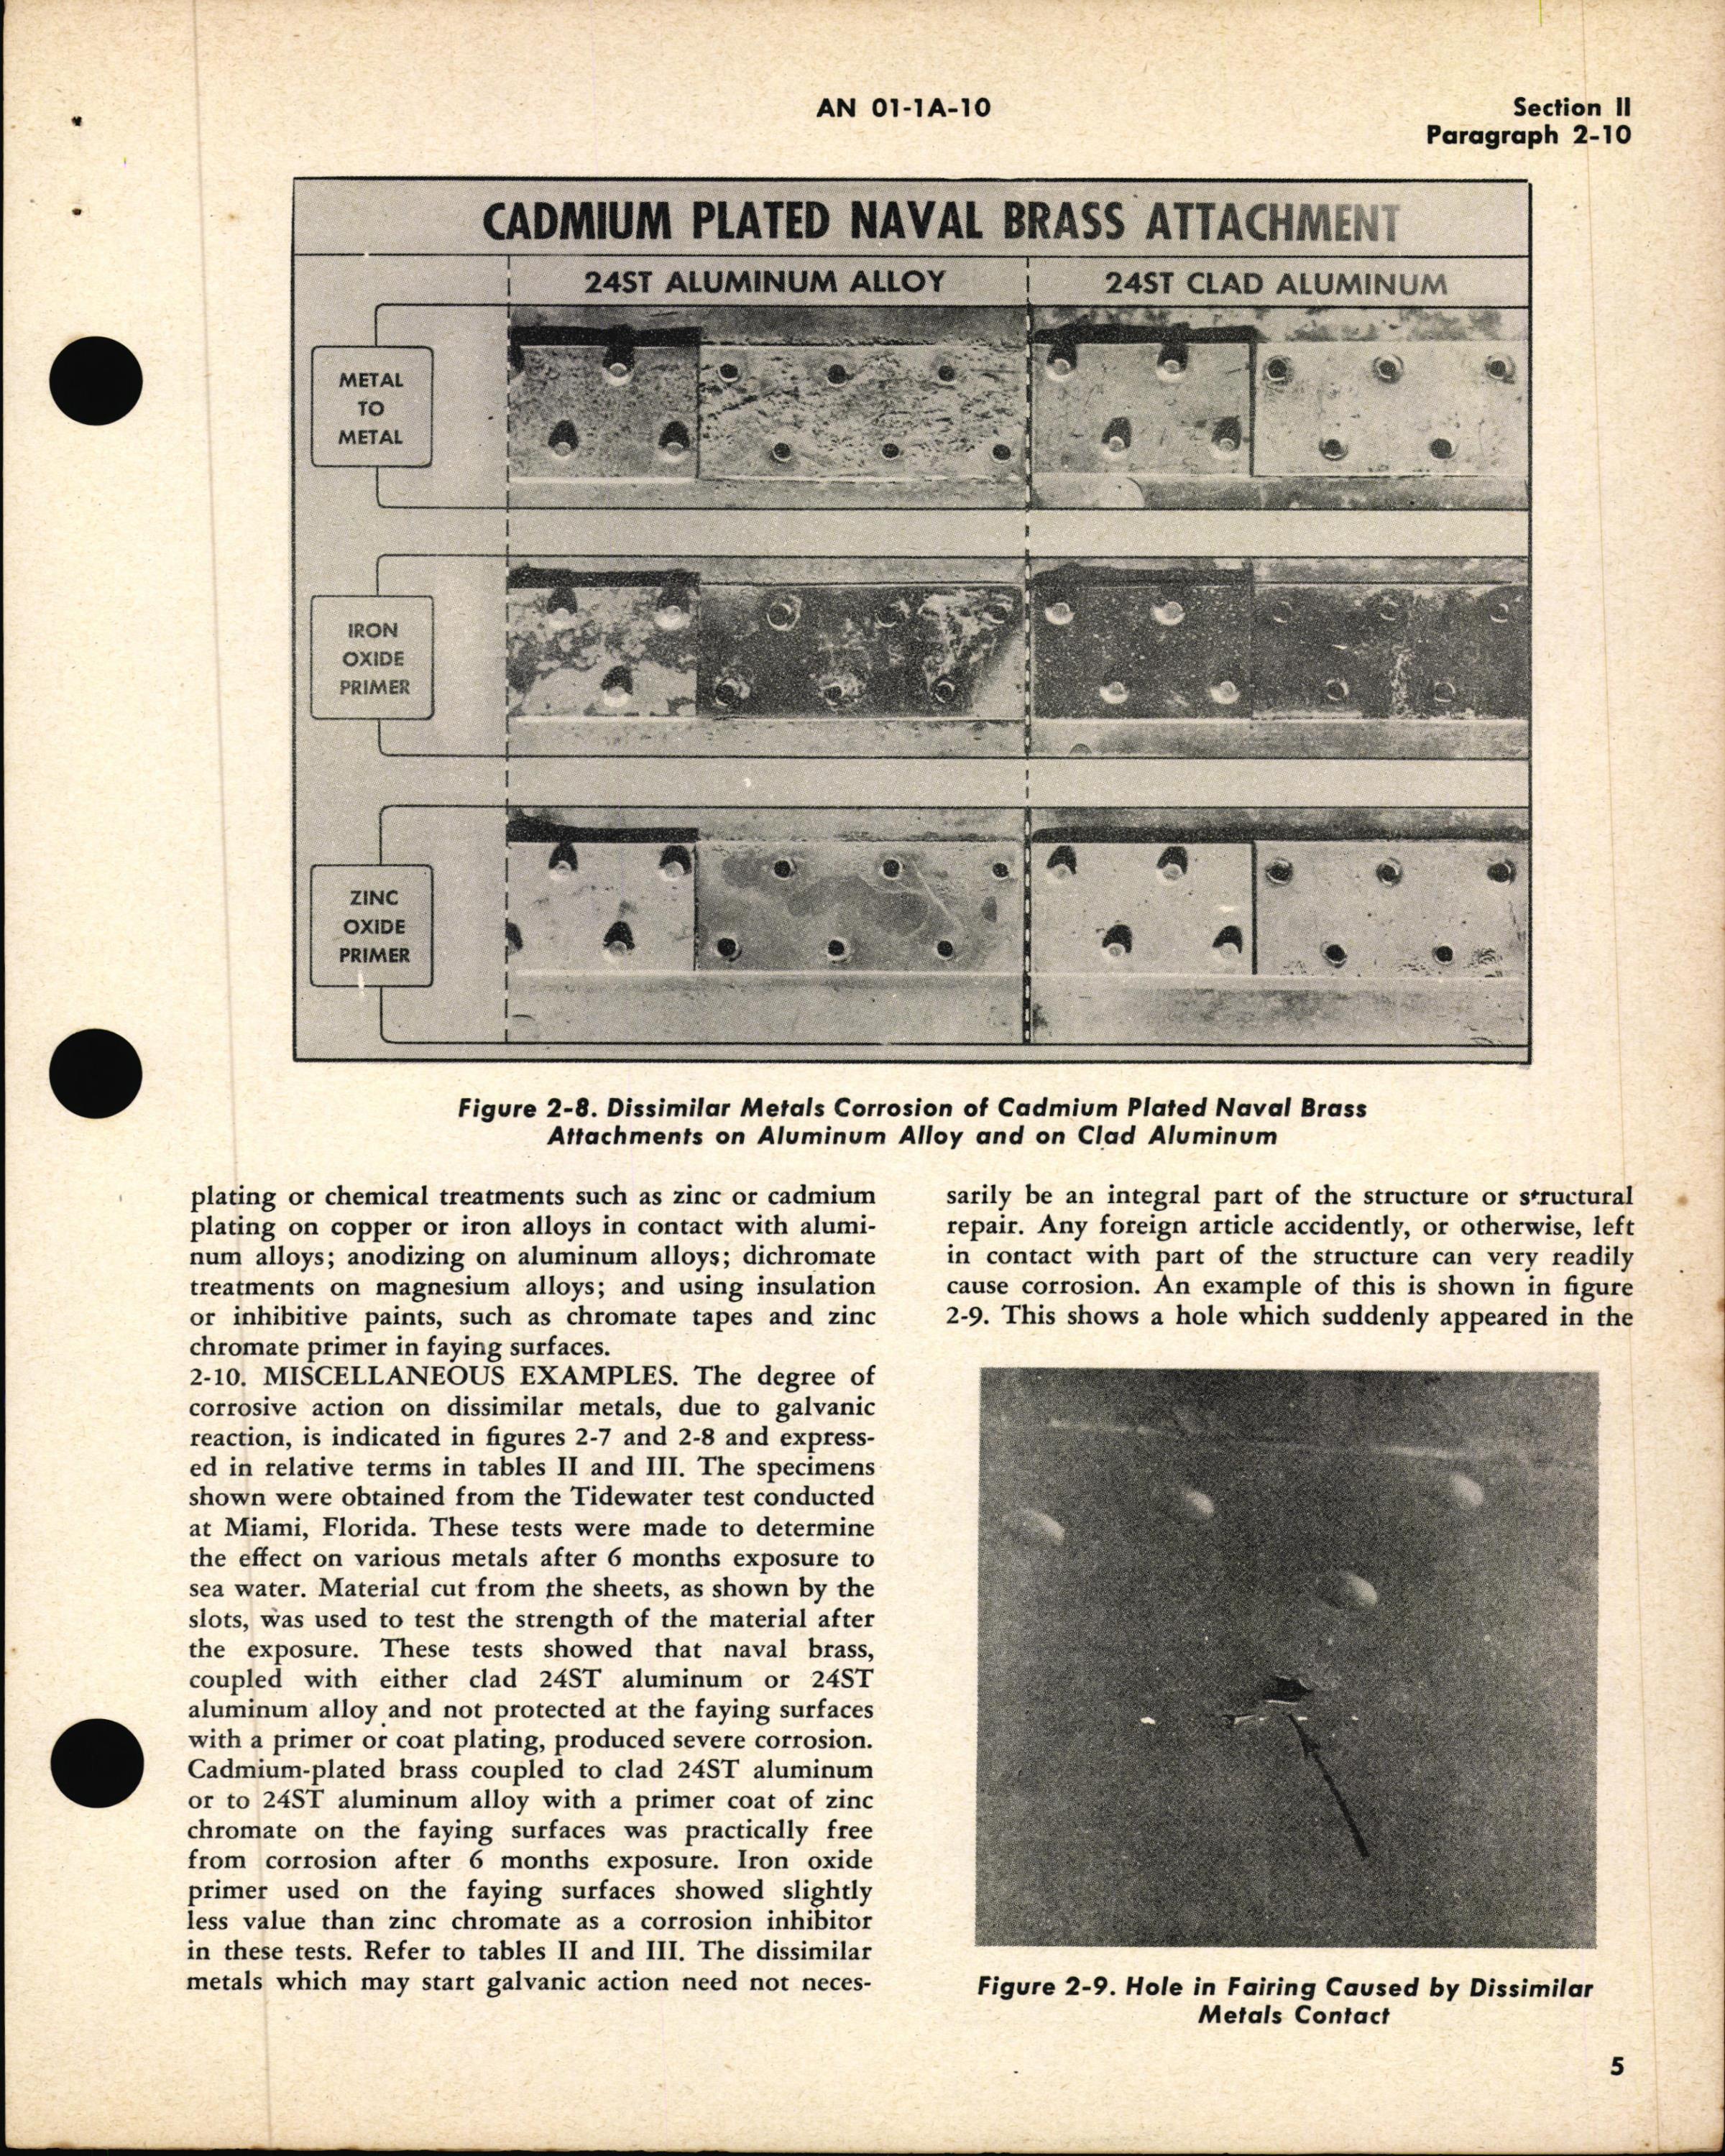 Sample page 9 from AirCorps Library document: Corrosion Control for Aircraft